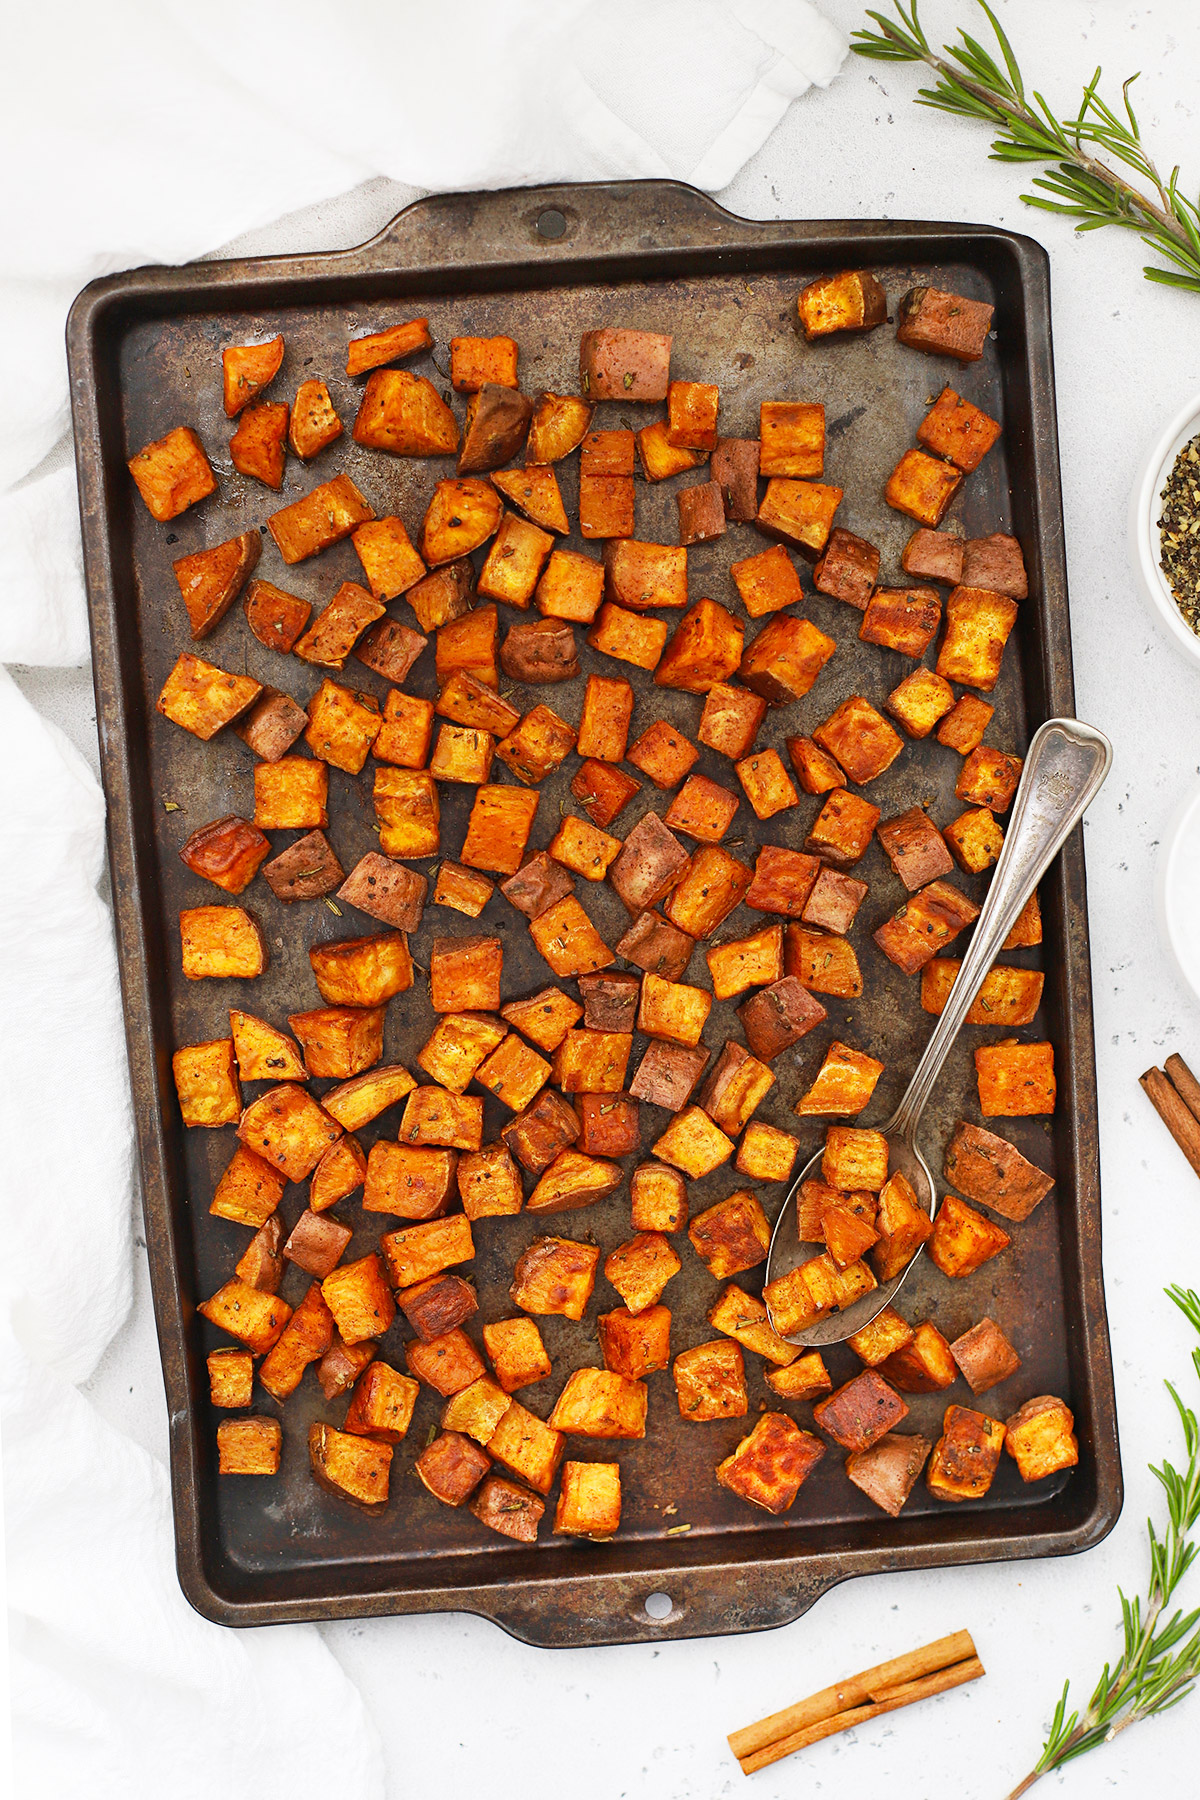 Overhead view of cinnamon roasted sweet potatoes on a baking sheet placed on a white background